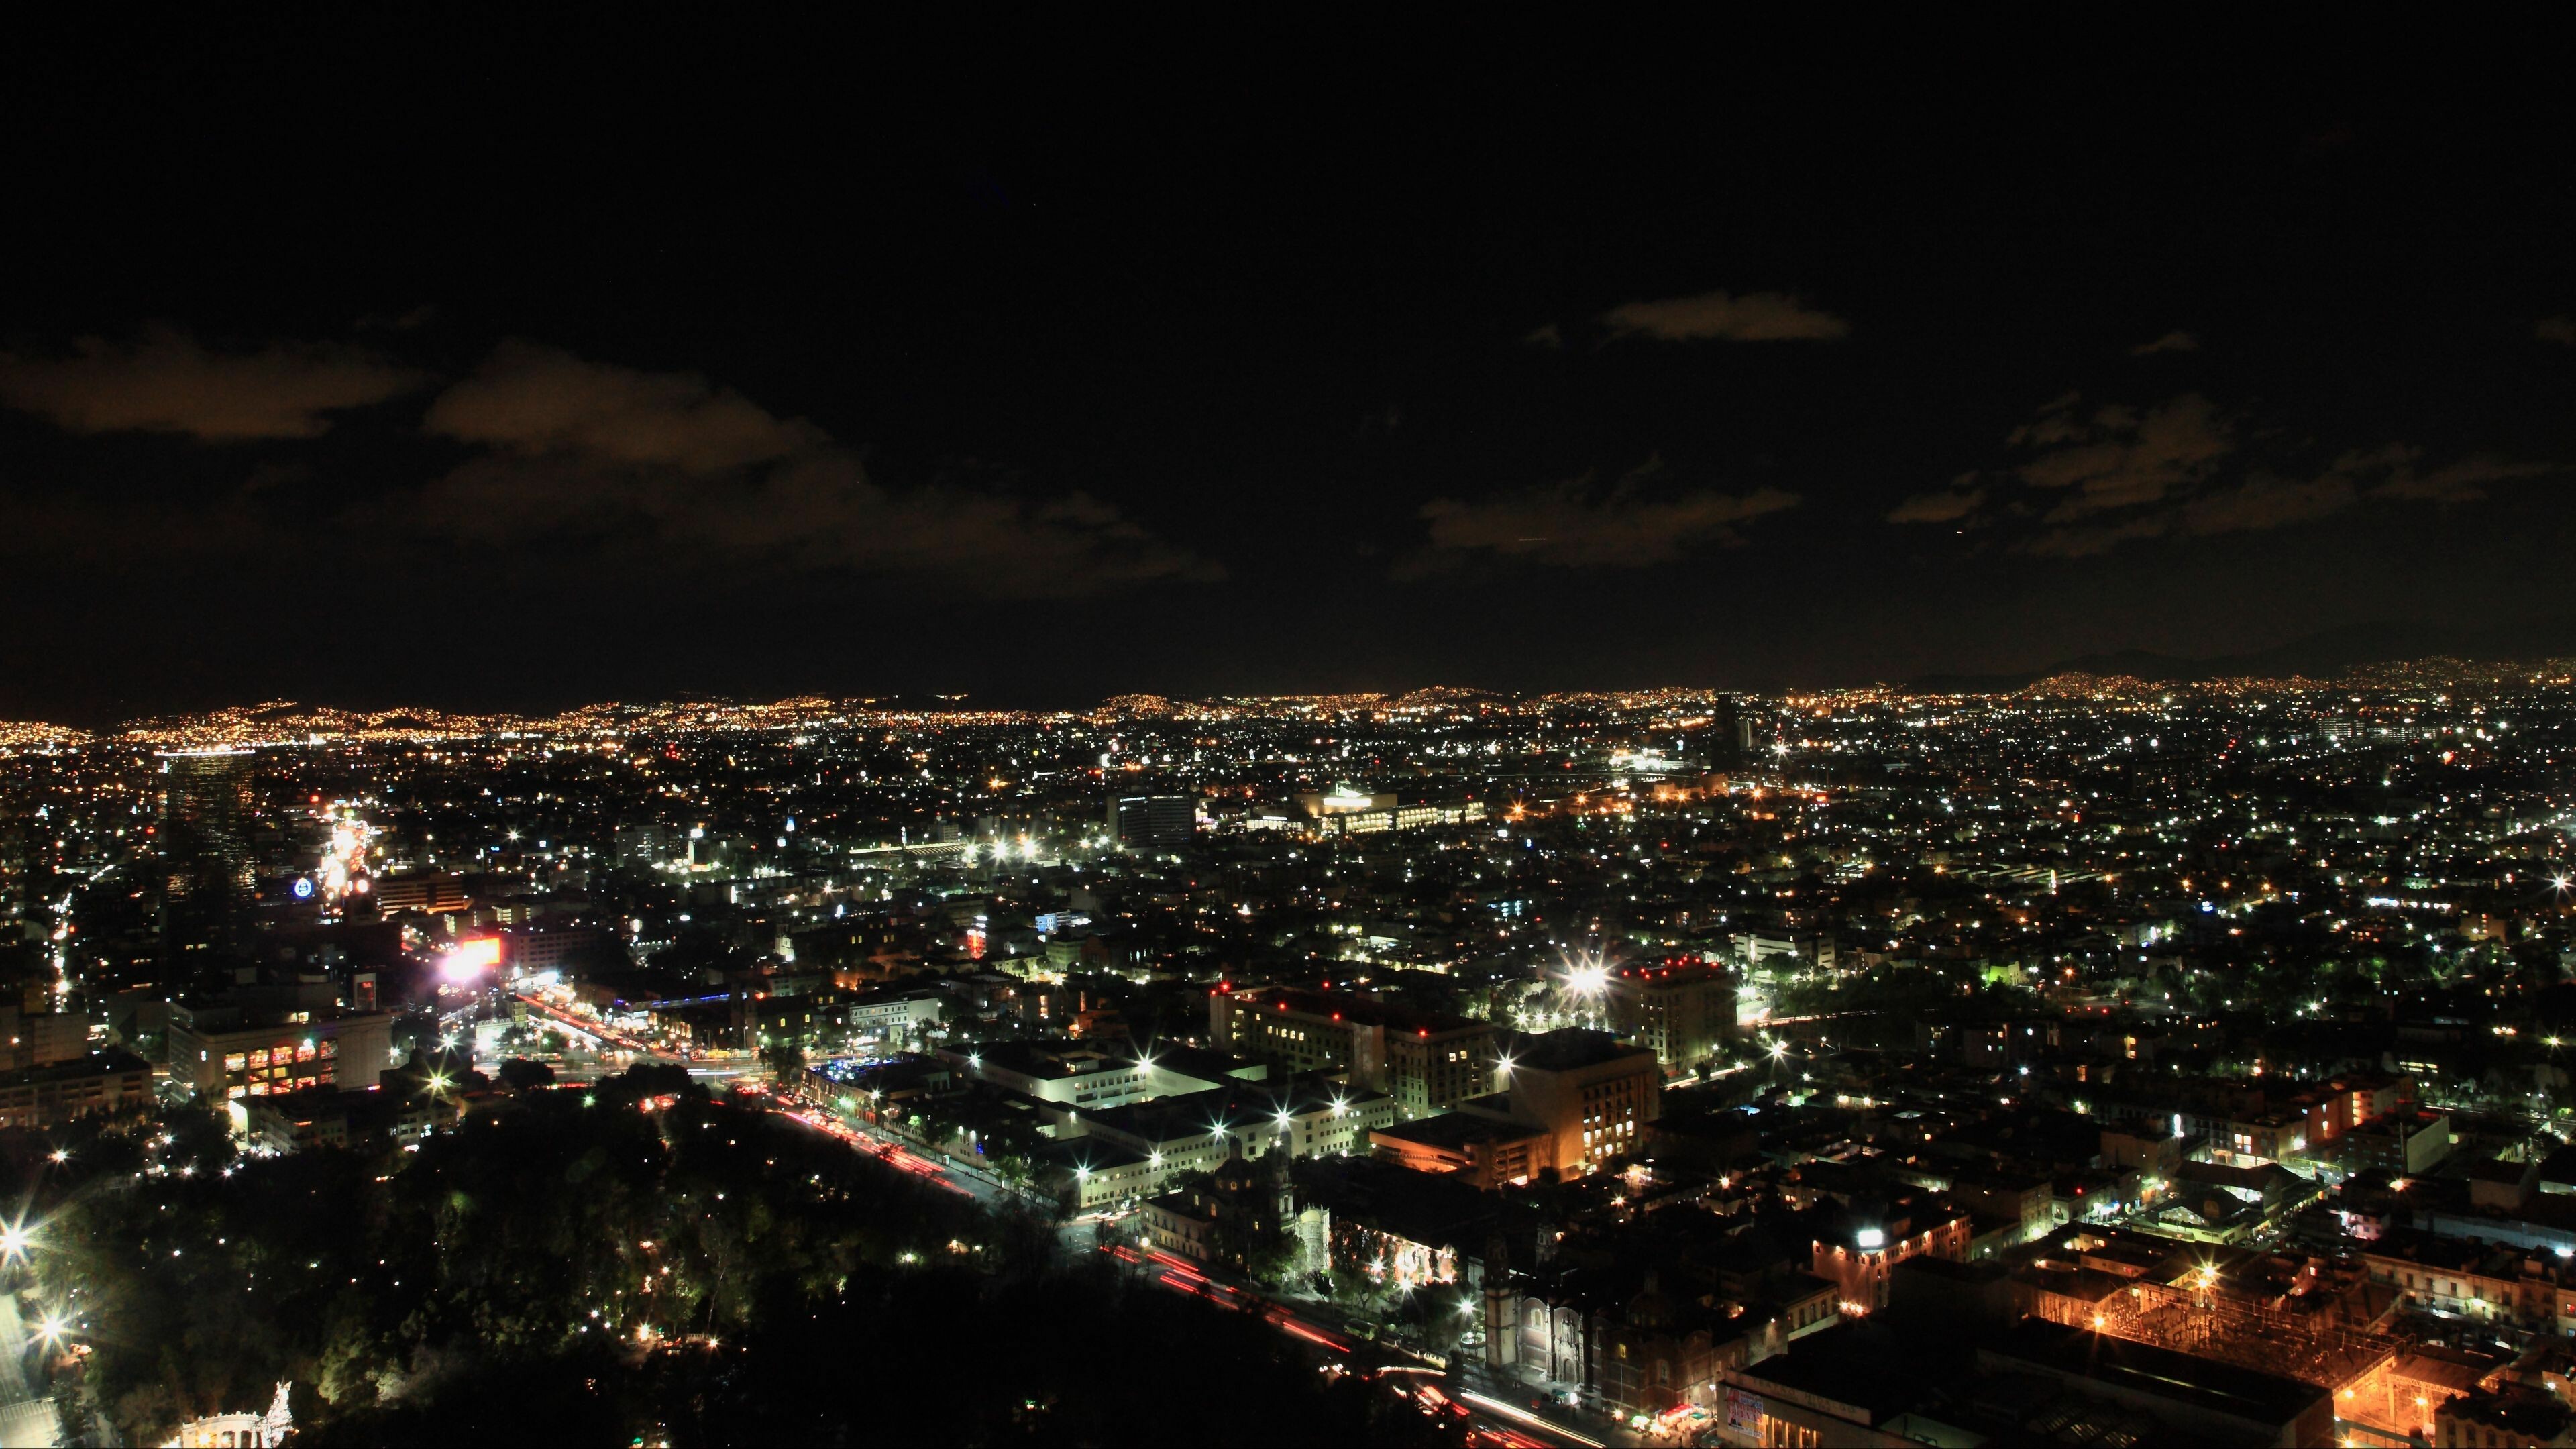 Mexico: Night city, City lights, The country covers 761,610 square miles. 3840x2160 4K Background.